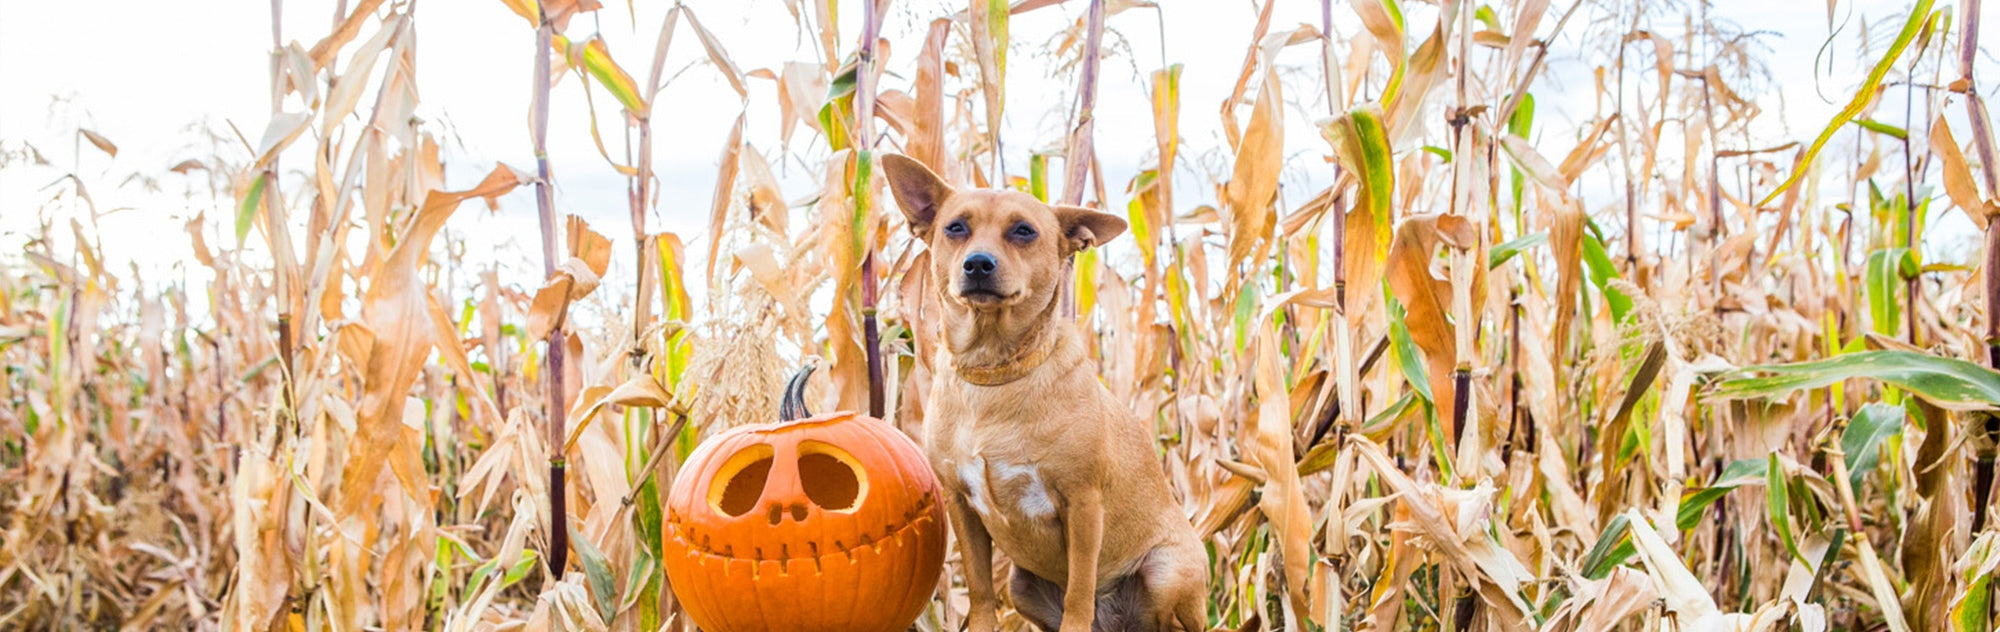 7 Halloween Safety Tips for Pets